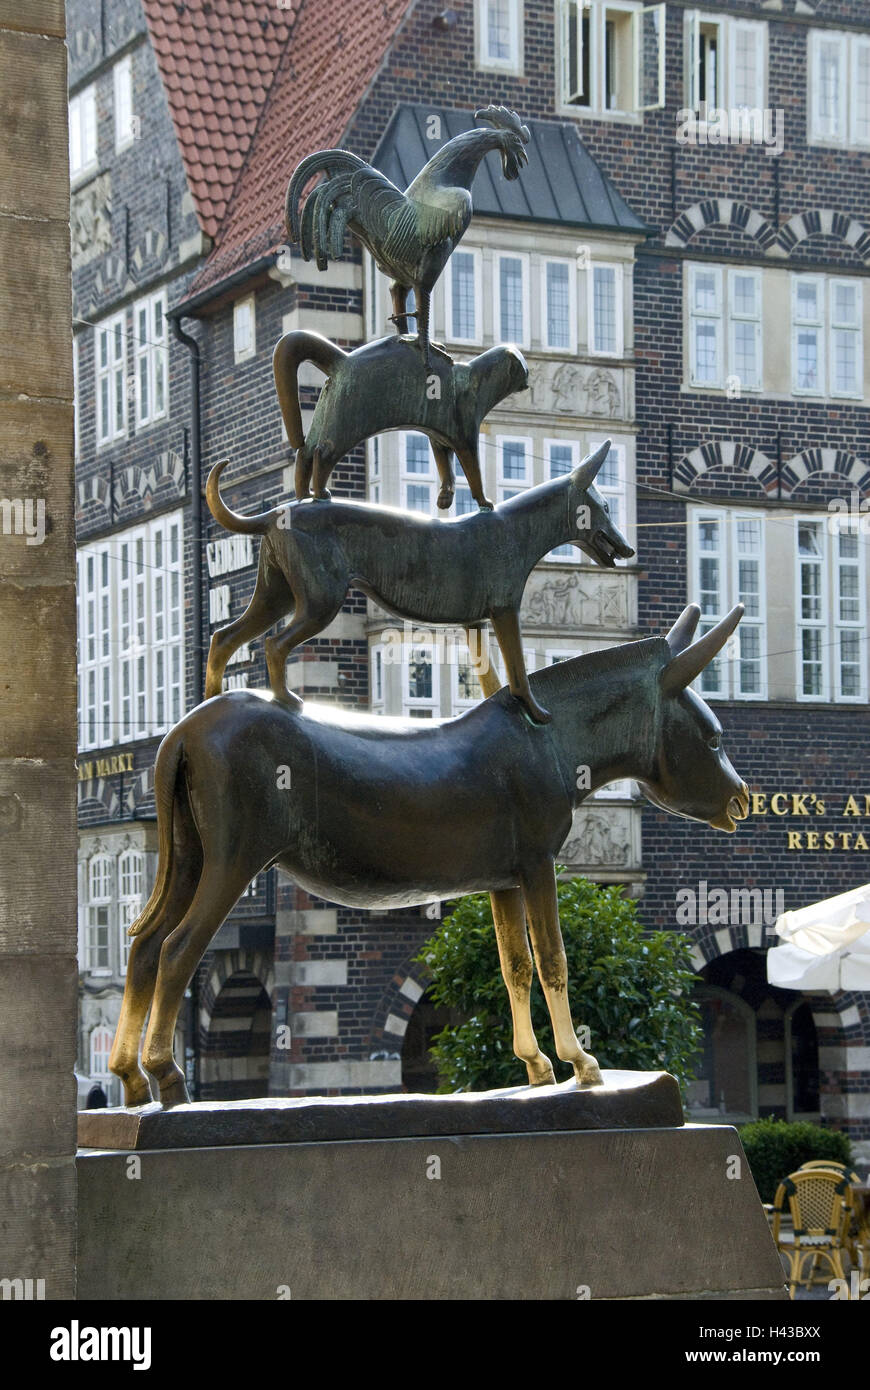 Germany, free Hanseatic town Bremen, monument, Bremen Town Musicians, place of interest, building, structures, architecture, defensive wall, facade, outside, brick building, culture, landmark, Stock Photo